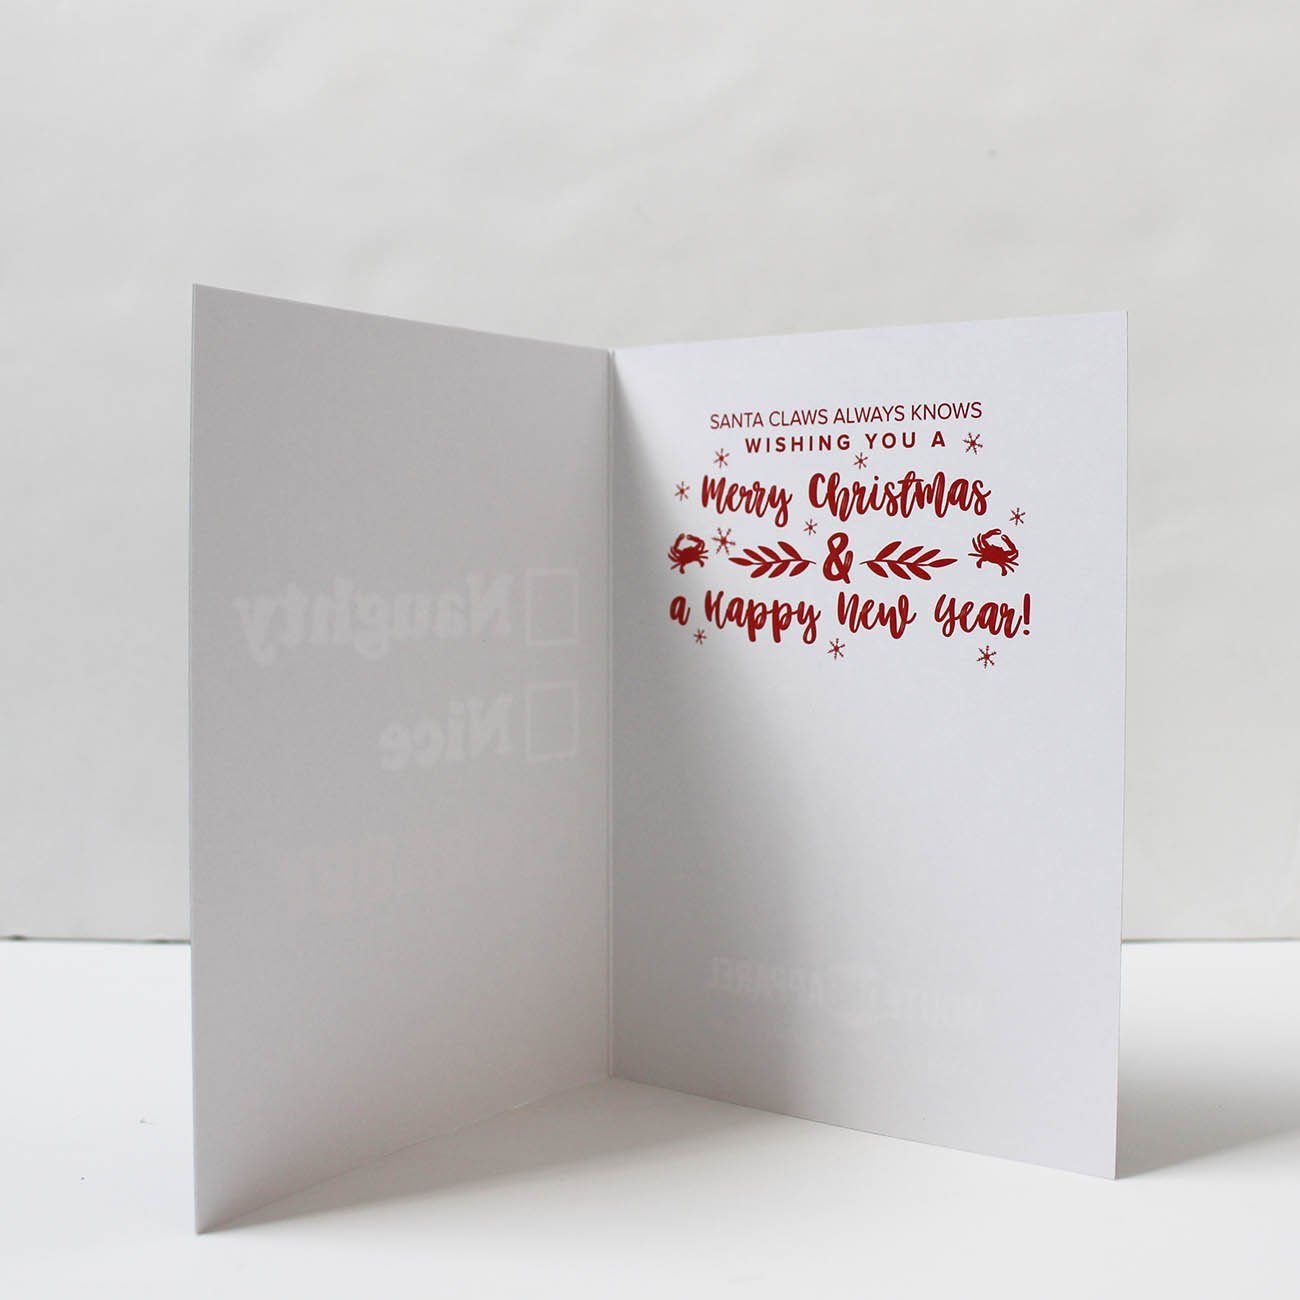 Naughty, Nice, Crabby / Christmas Card - Route One Apparel